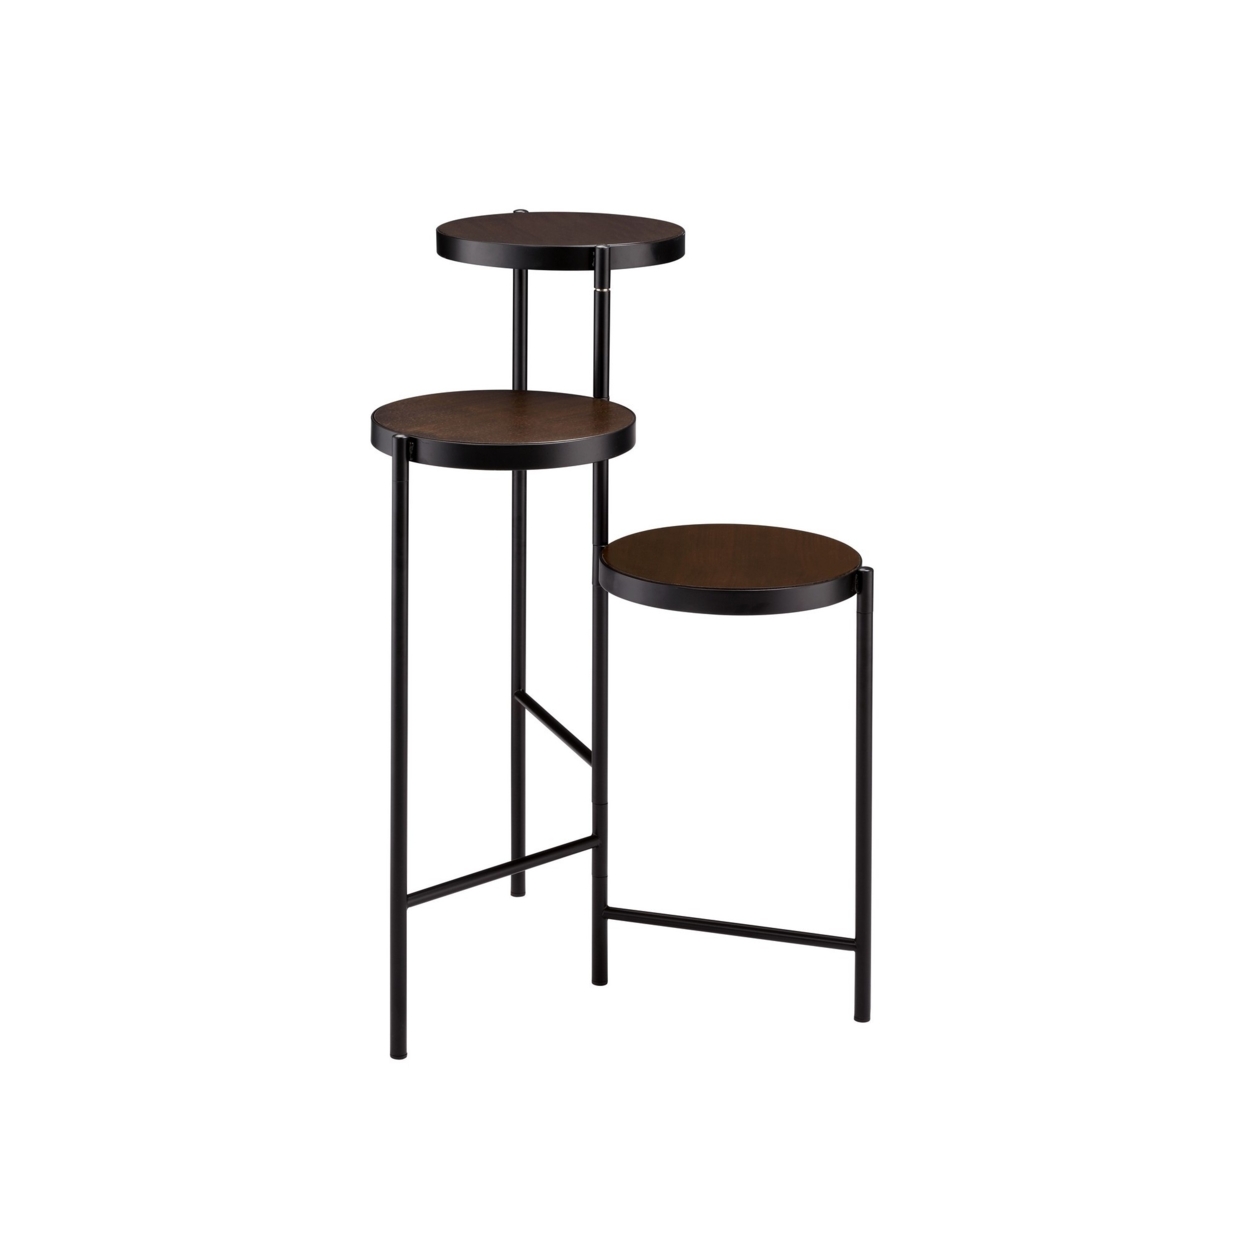 3 Tier Plant Stand With Round Wooden Shelves And Foldable Design, Black- Saltoro Sherpi